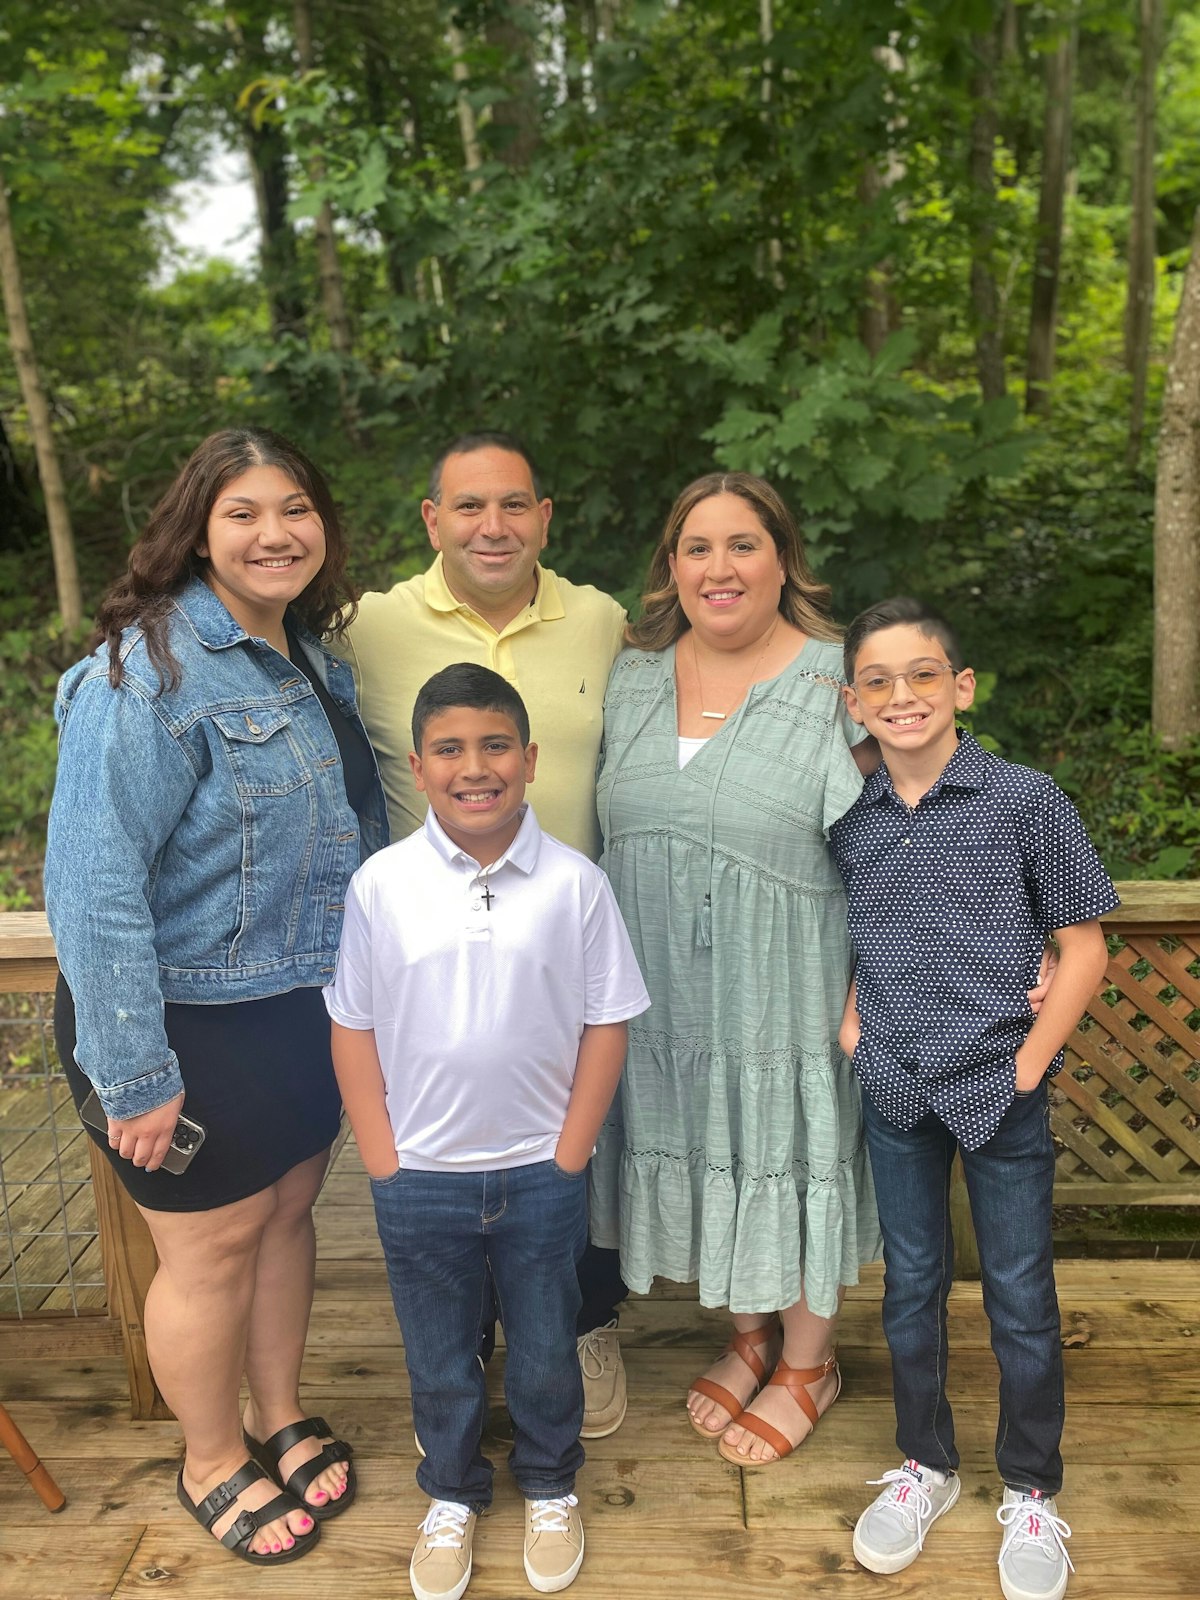 Mary Ann Joseph, second from right, is pictured with her family, including her step-daughter, Angela, 19, husband Raymond, and sons Cameron, 9, and Christian, 11.